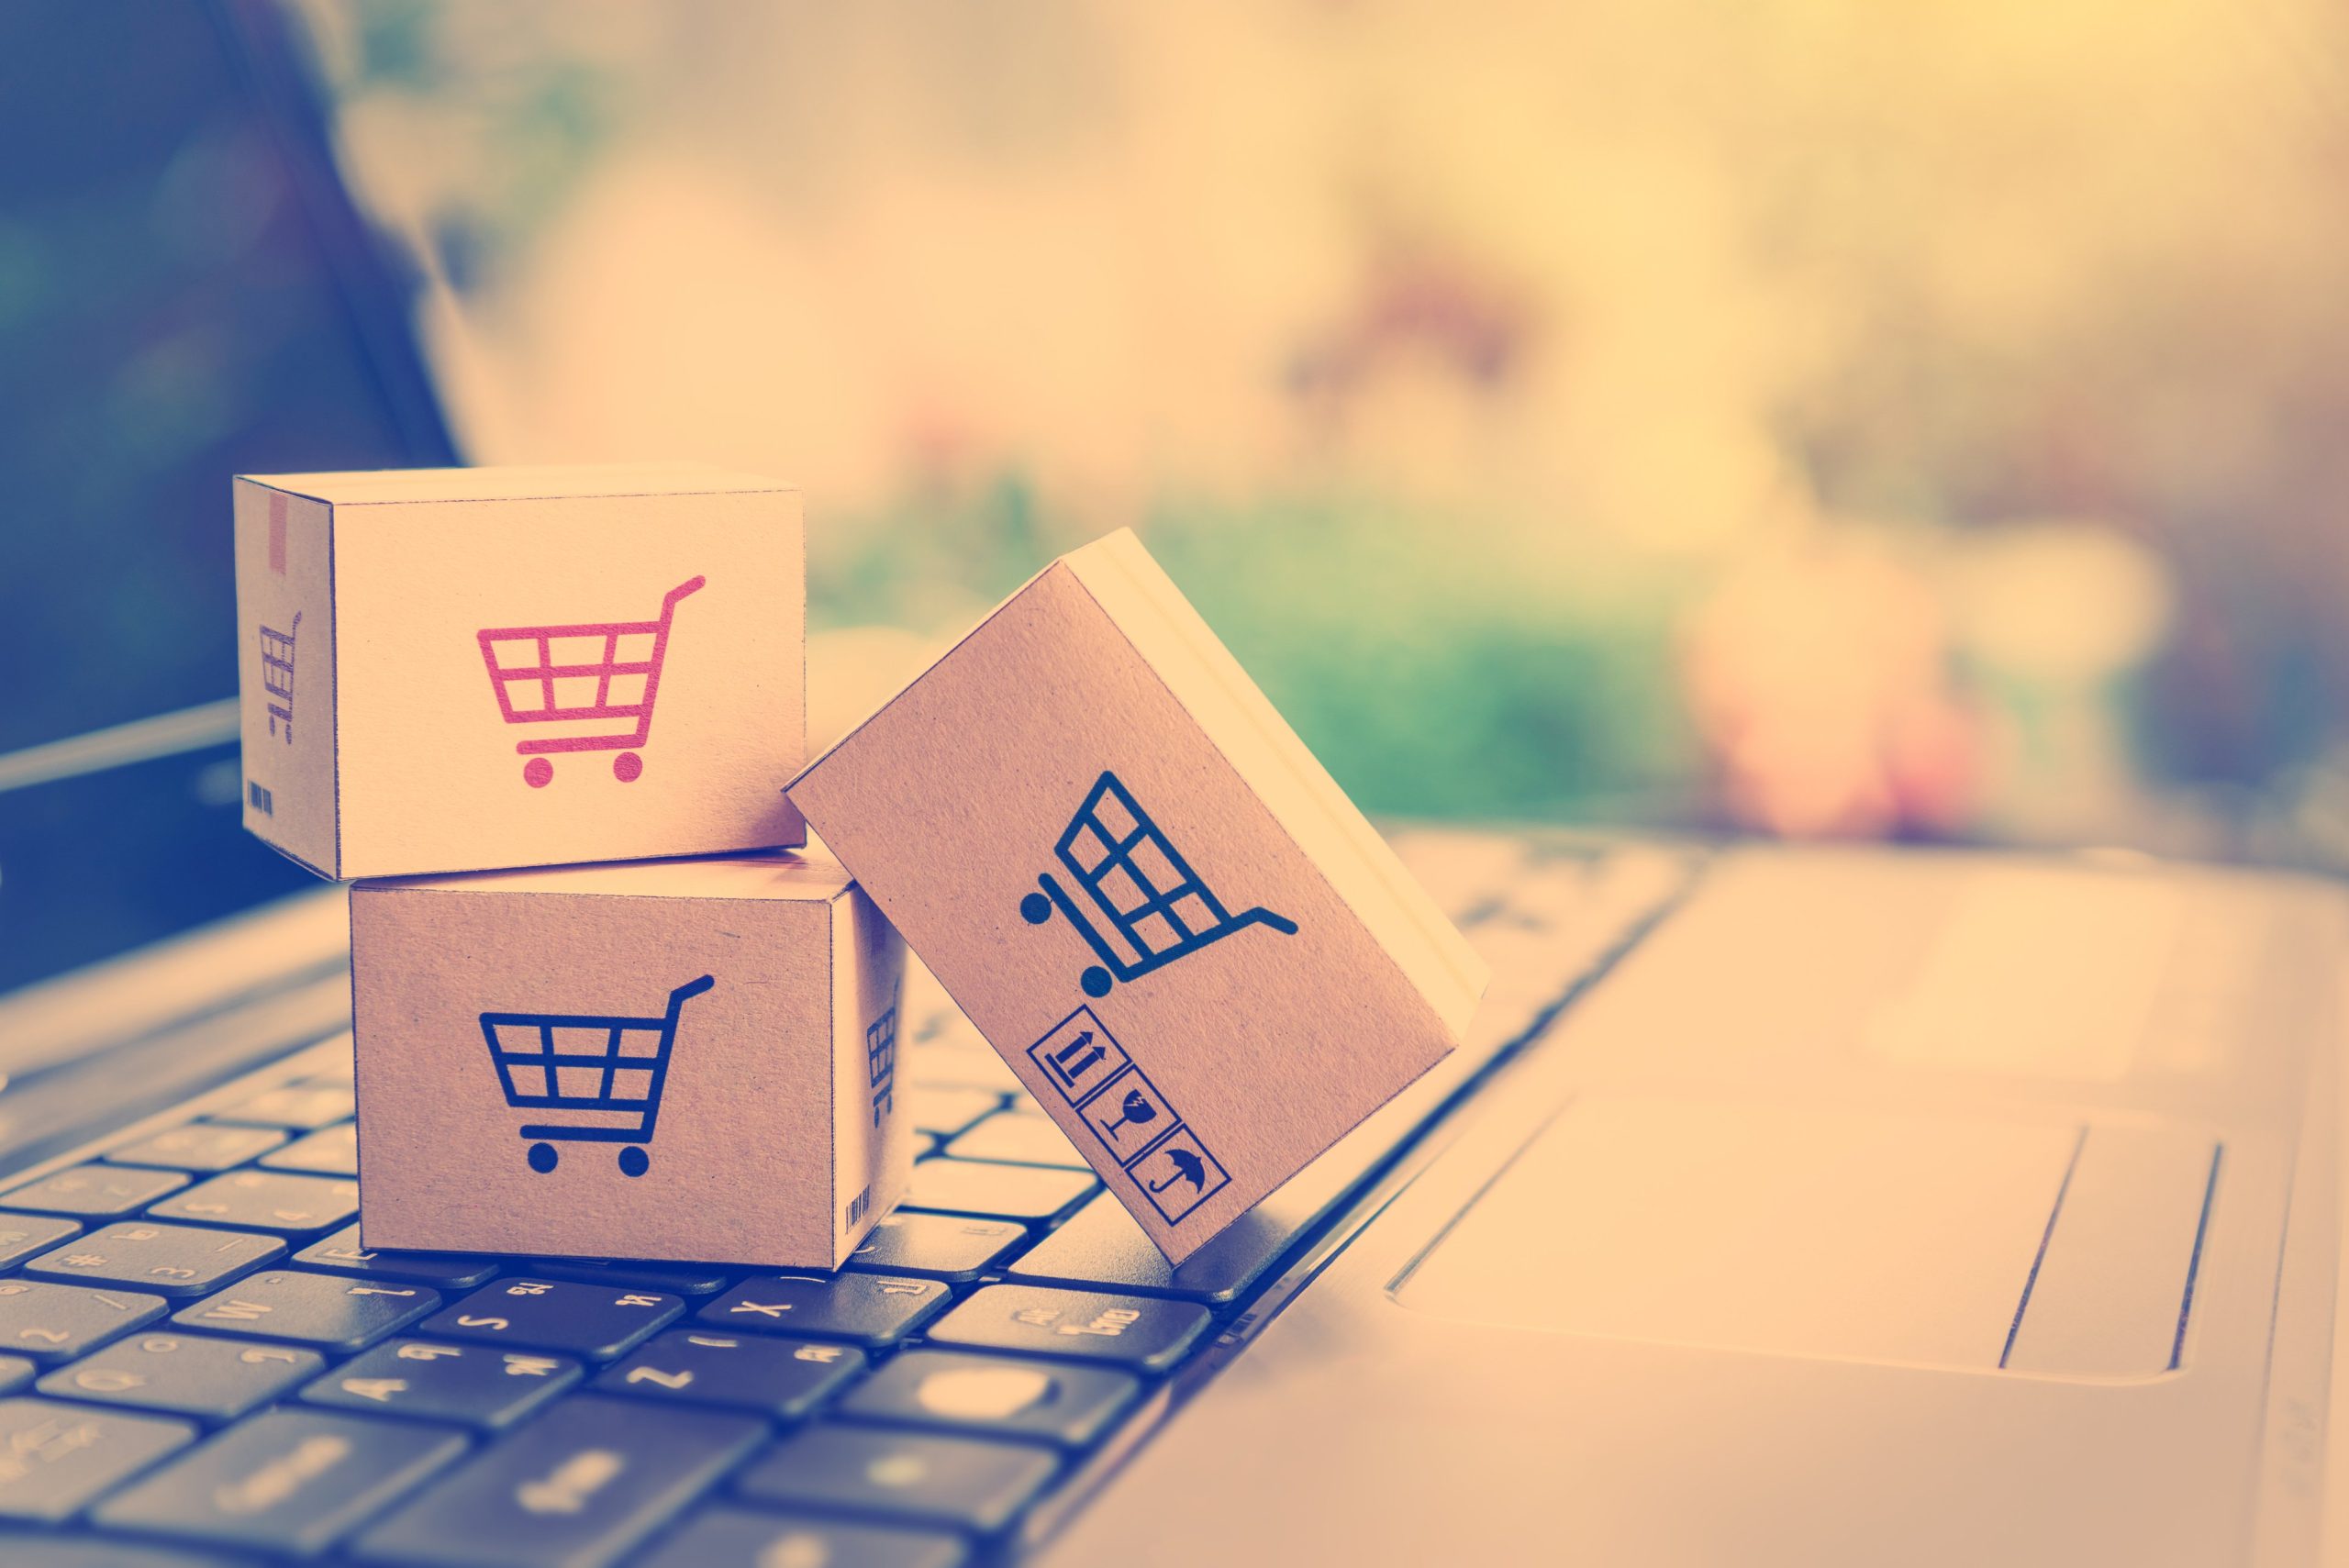 eCommerce simplifies inventory management and scaling